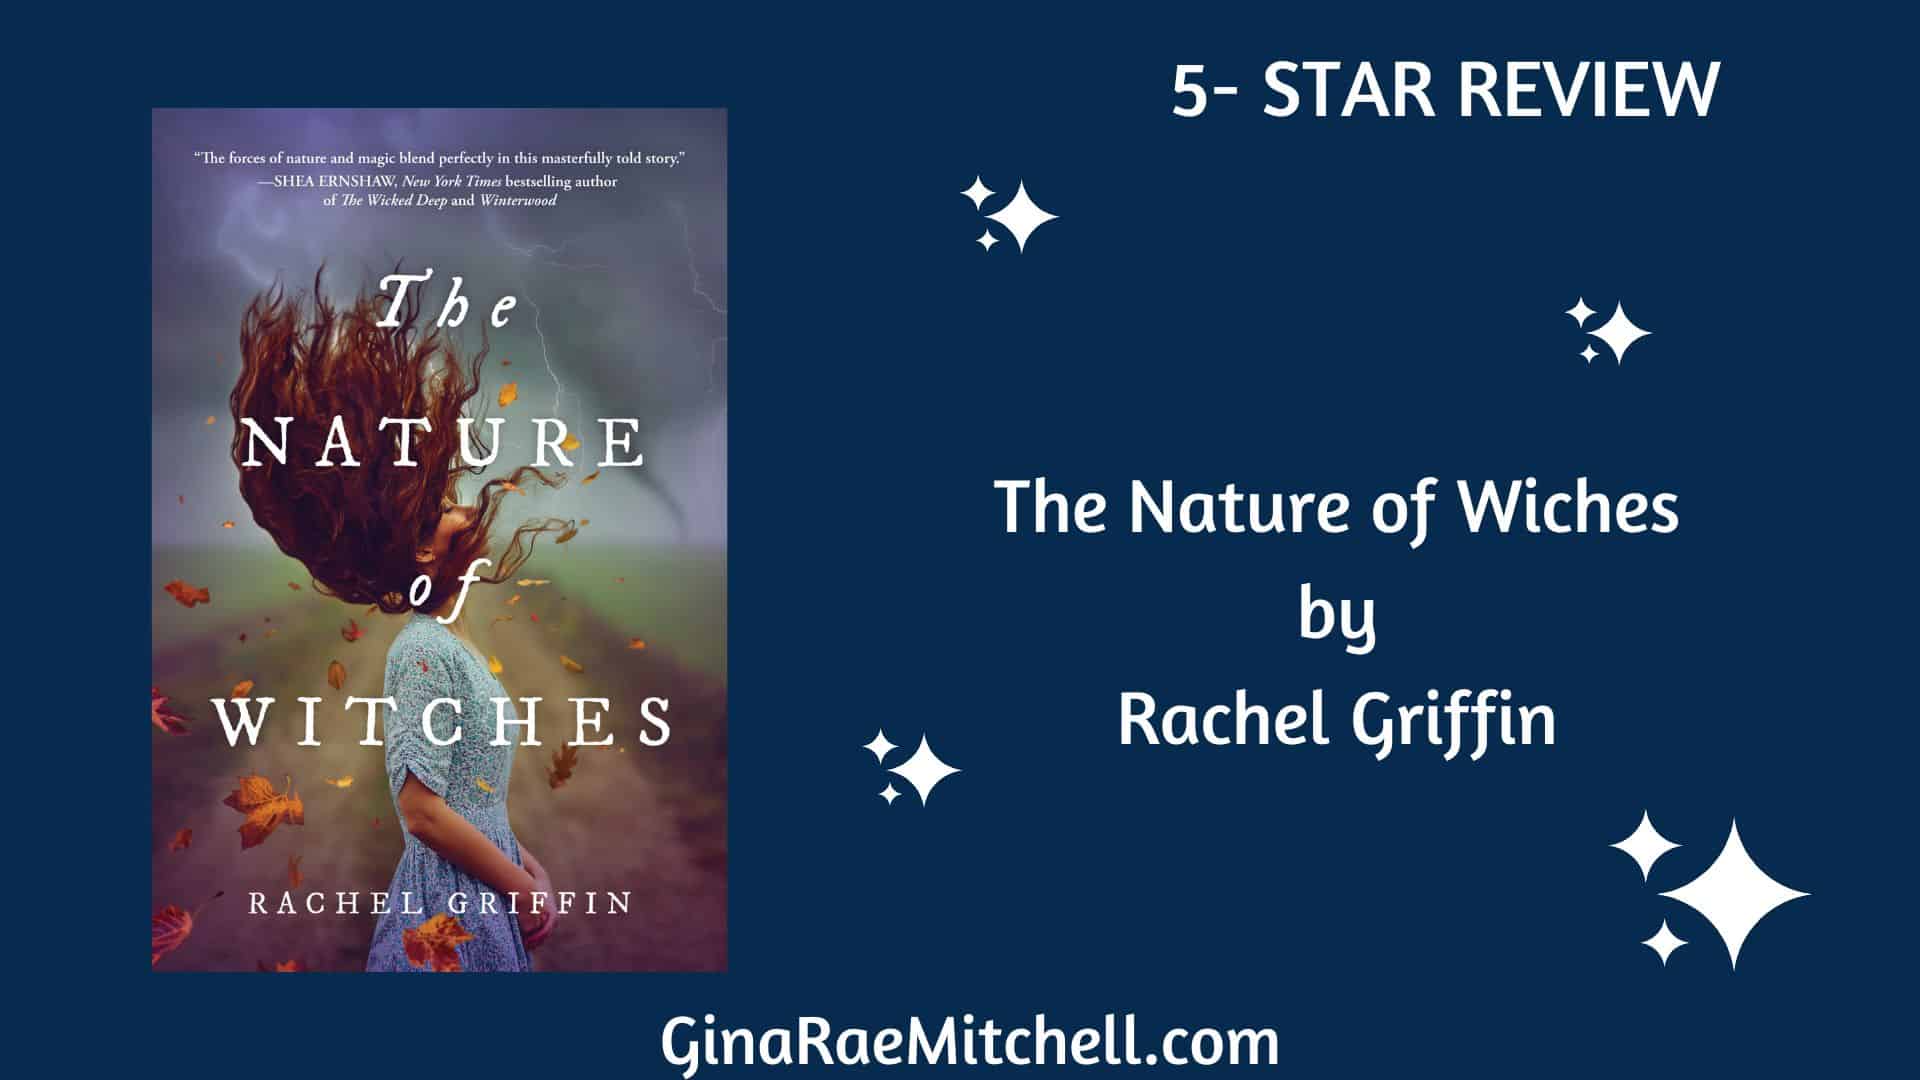 The Nature of Witches by Rachel Griffin | 5-Star Book Review | A powerful tale of witches, friendship & love!,